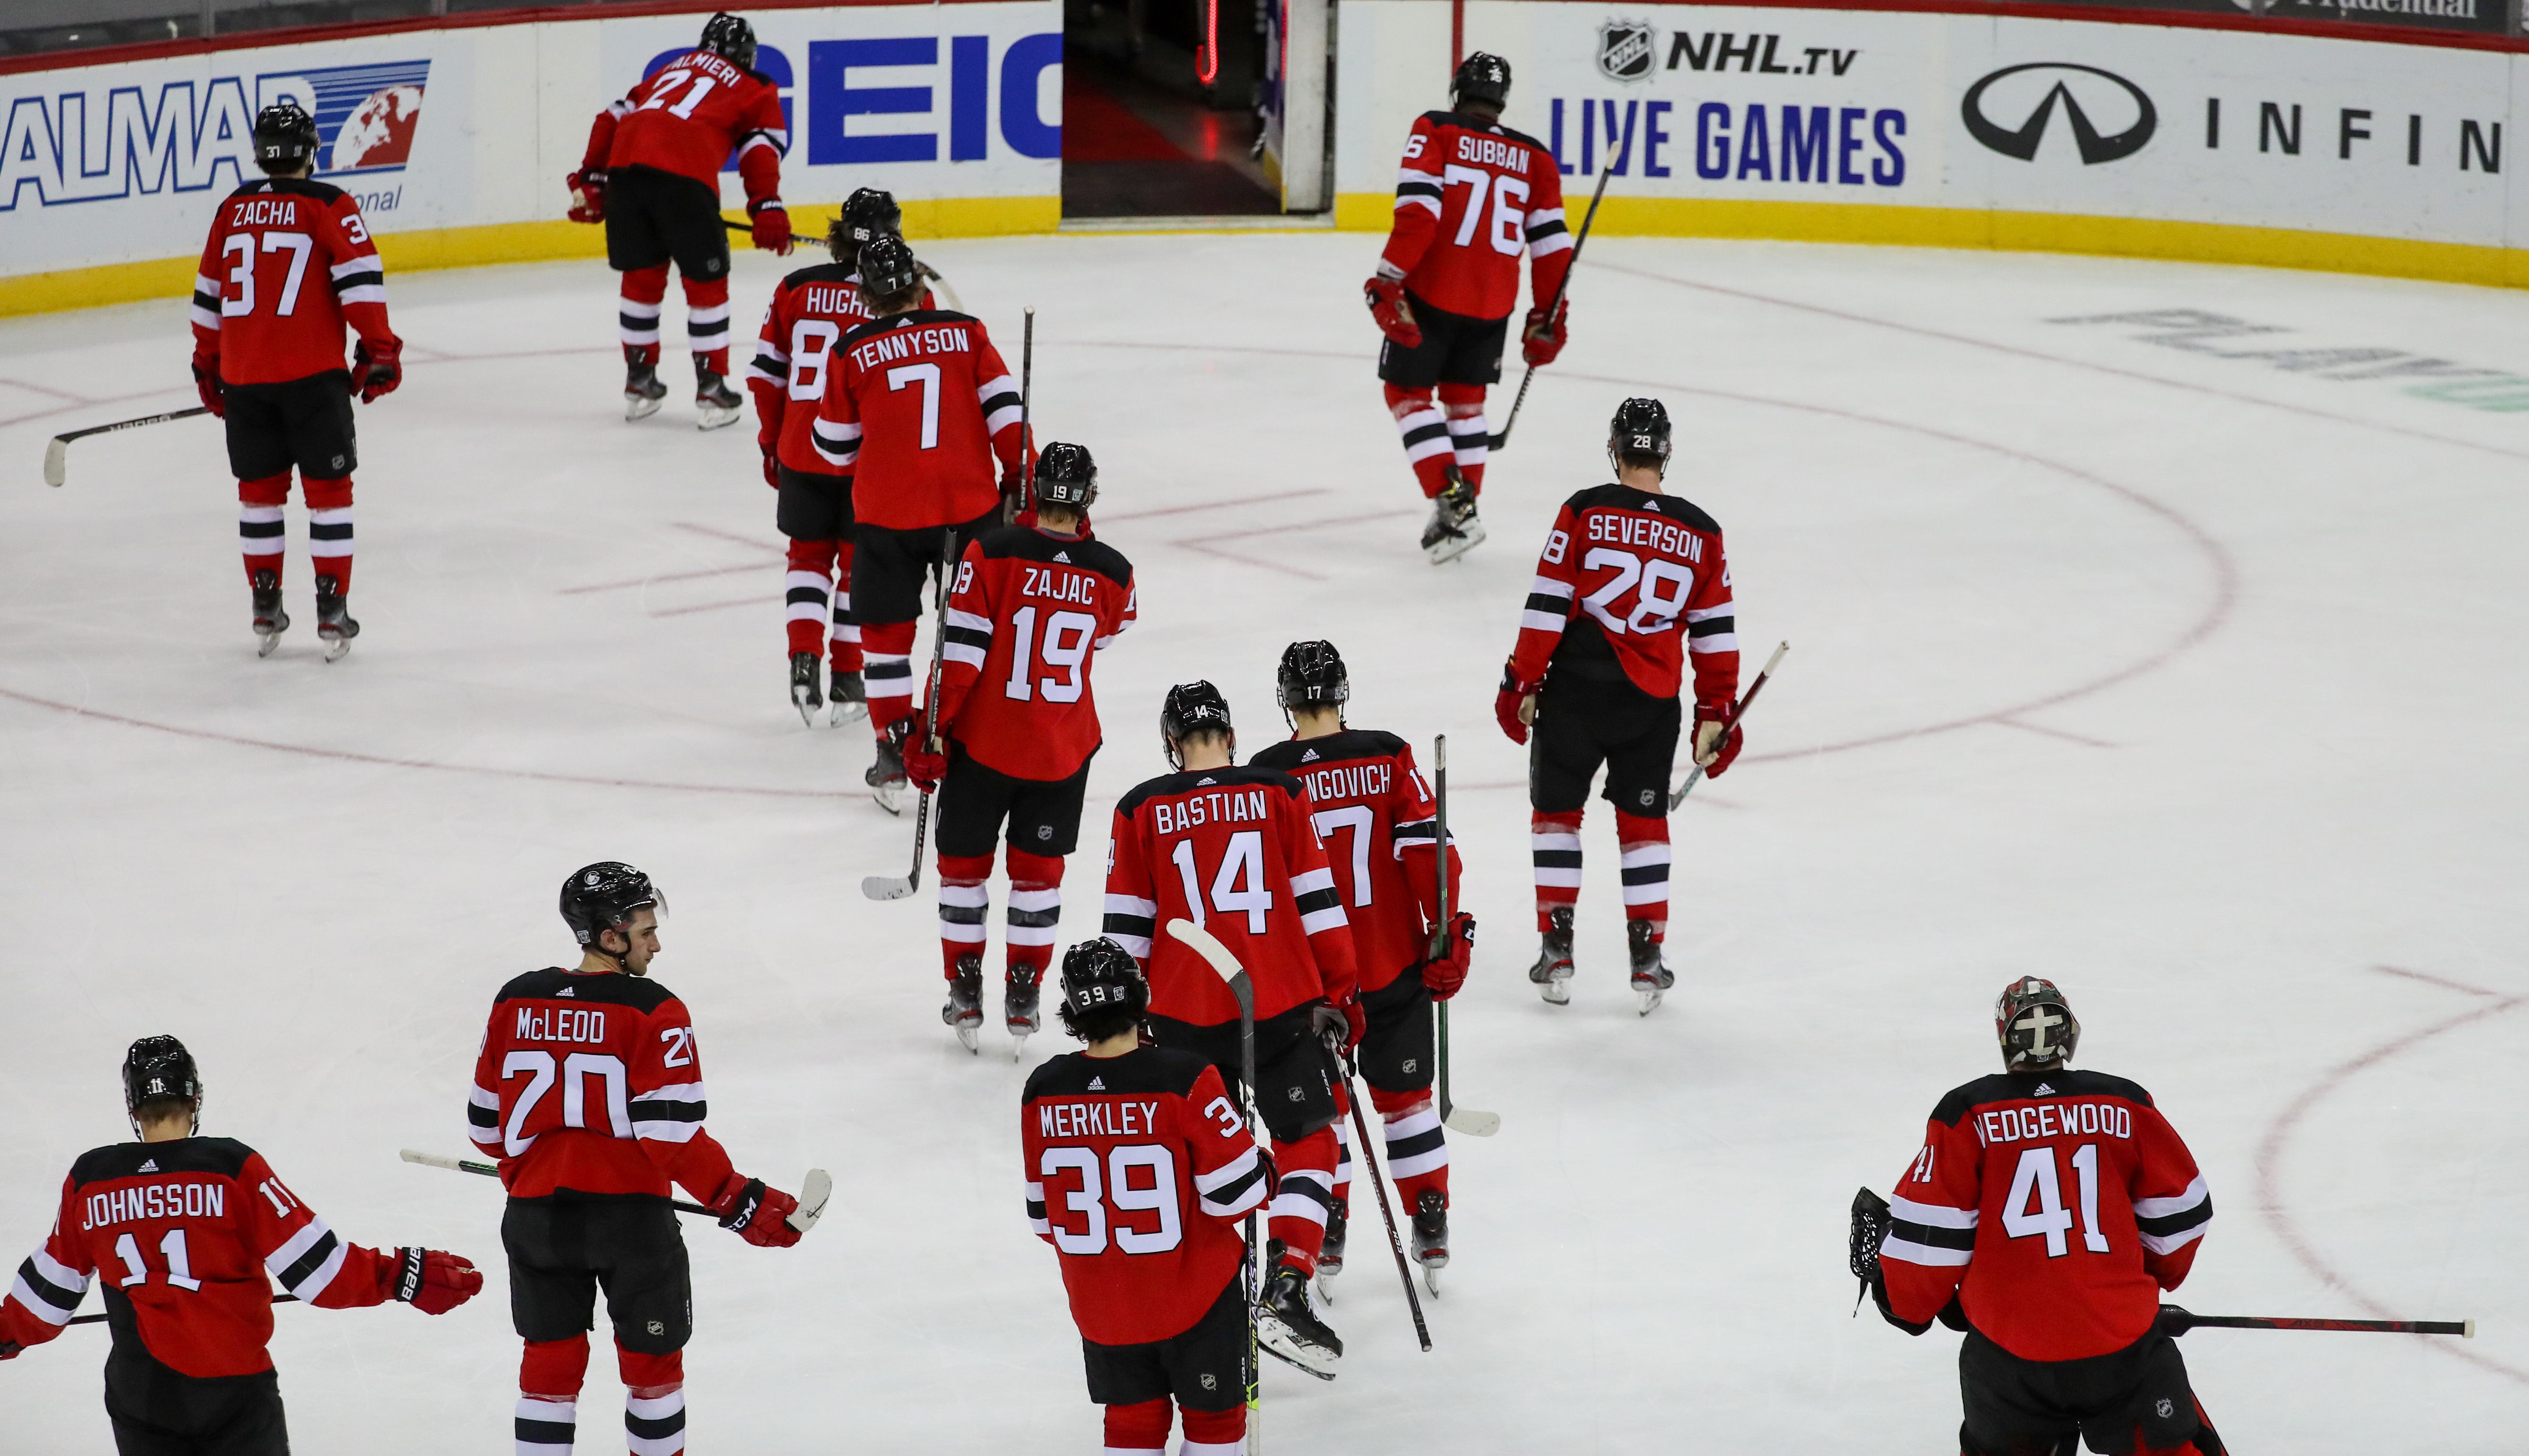 Devils practice for 1st time since COVID-19 shutdown